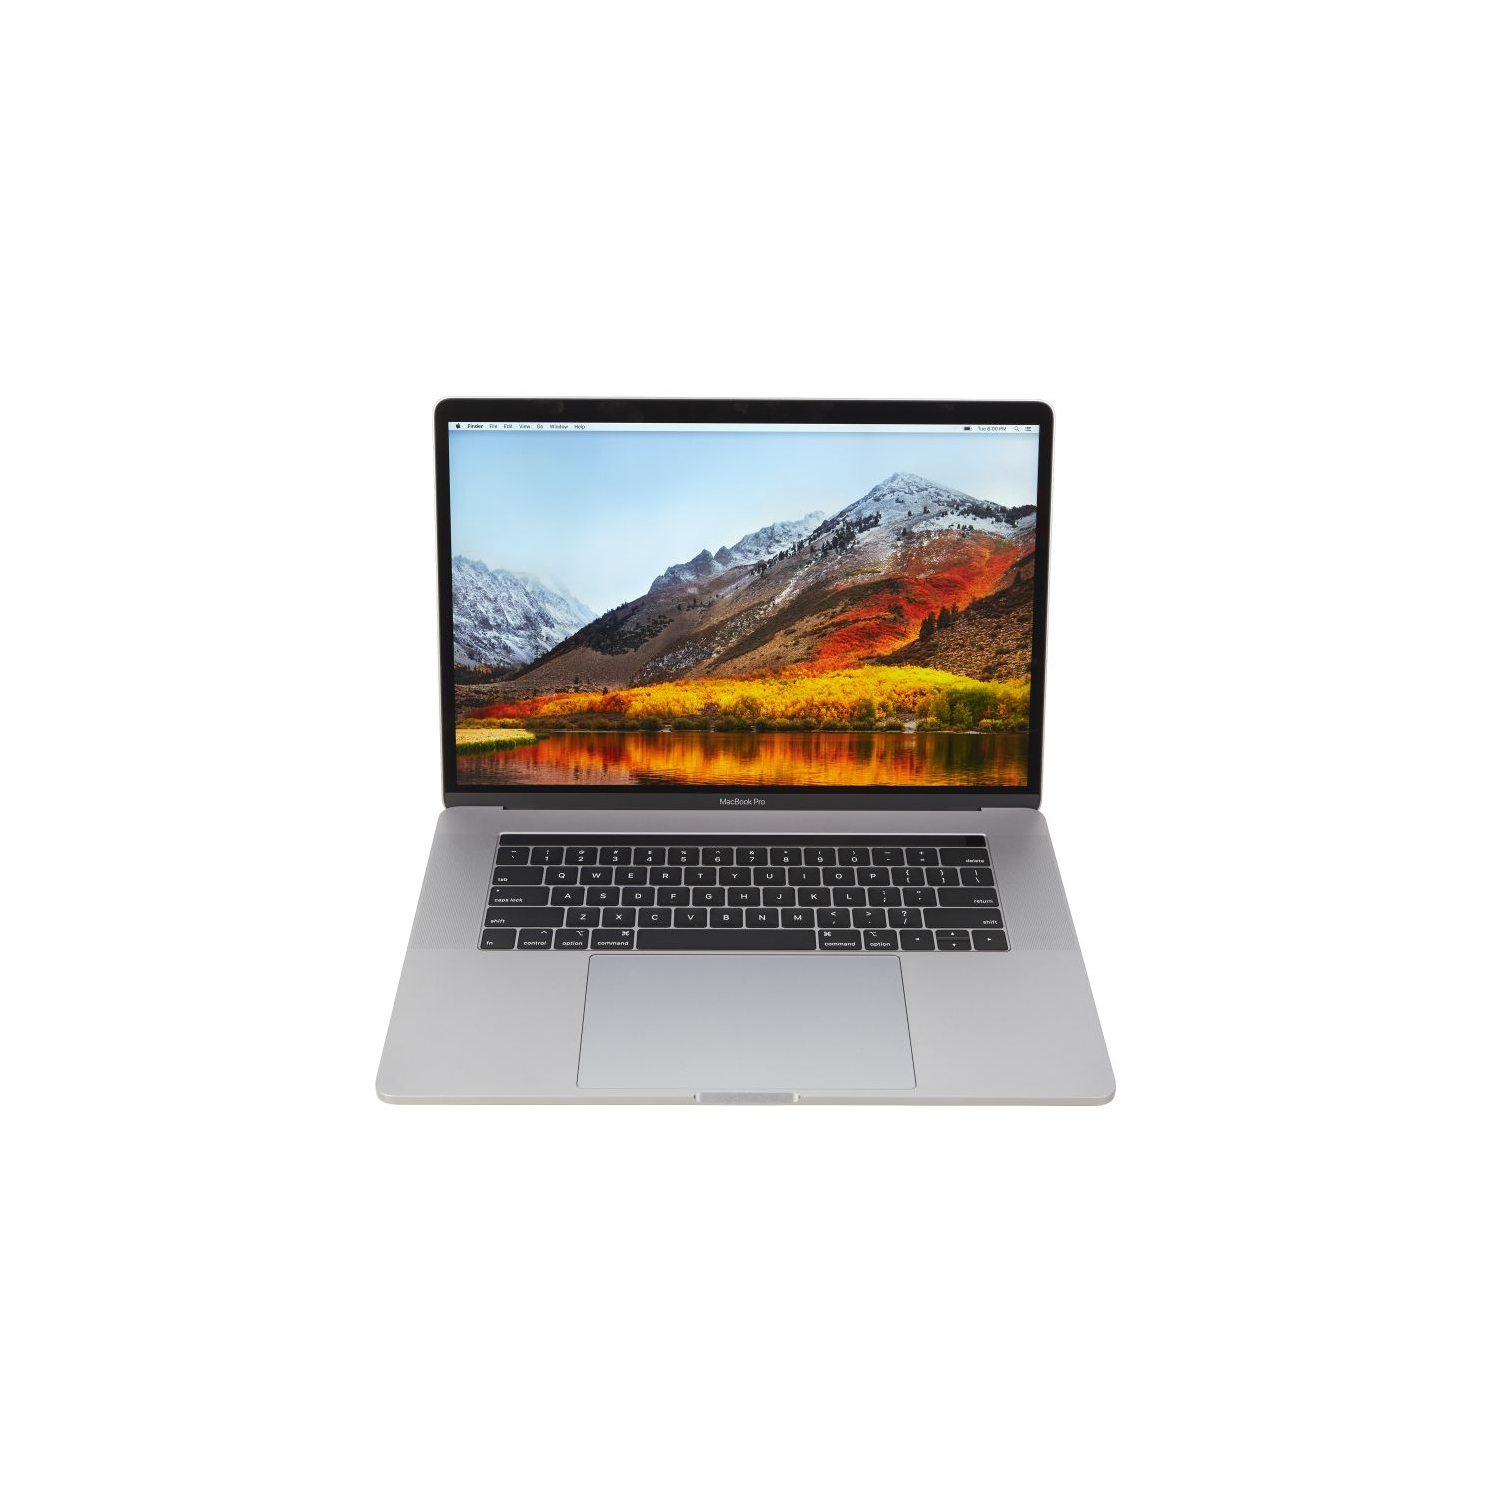 Refurbished (Good) - Apple MacBook Pro 15 Inch - Core i7 8750H - 2.2GHZ -  16GB RAM - 256GB SSD - With Touch Bar - Mid-2018 - MR932LL/A - A1990(Grade  A) | Best Buy Canada